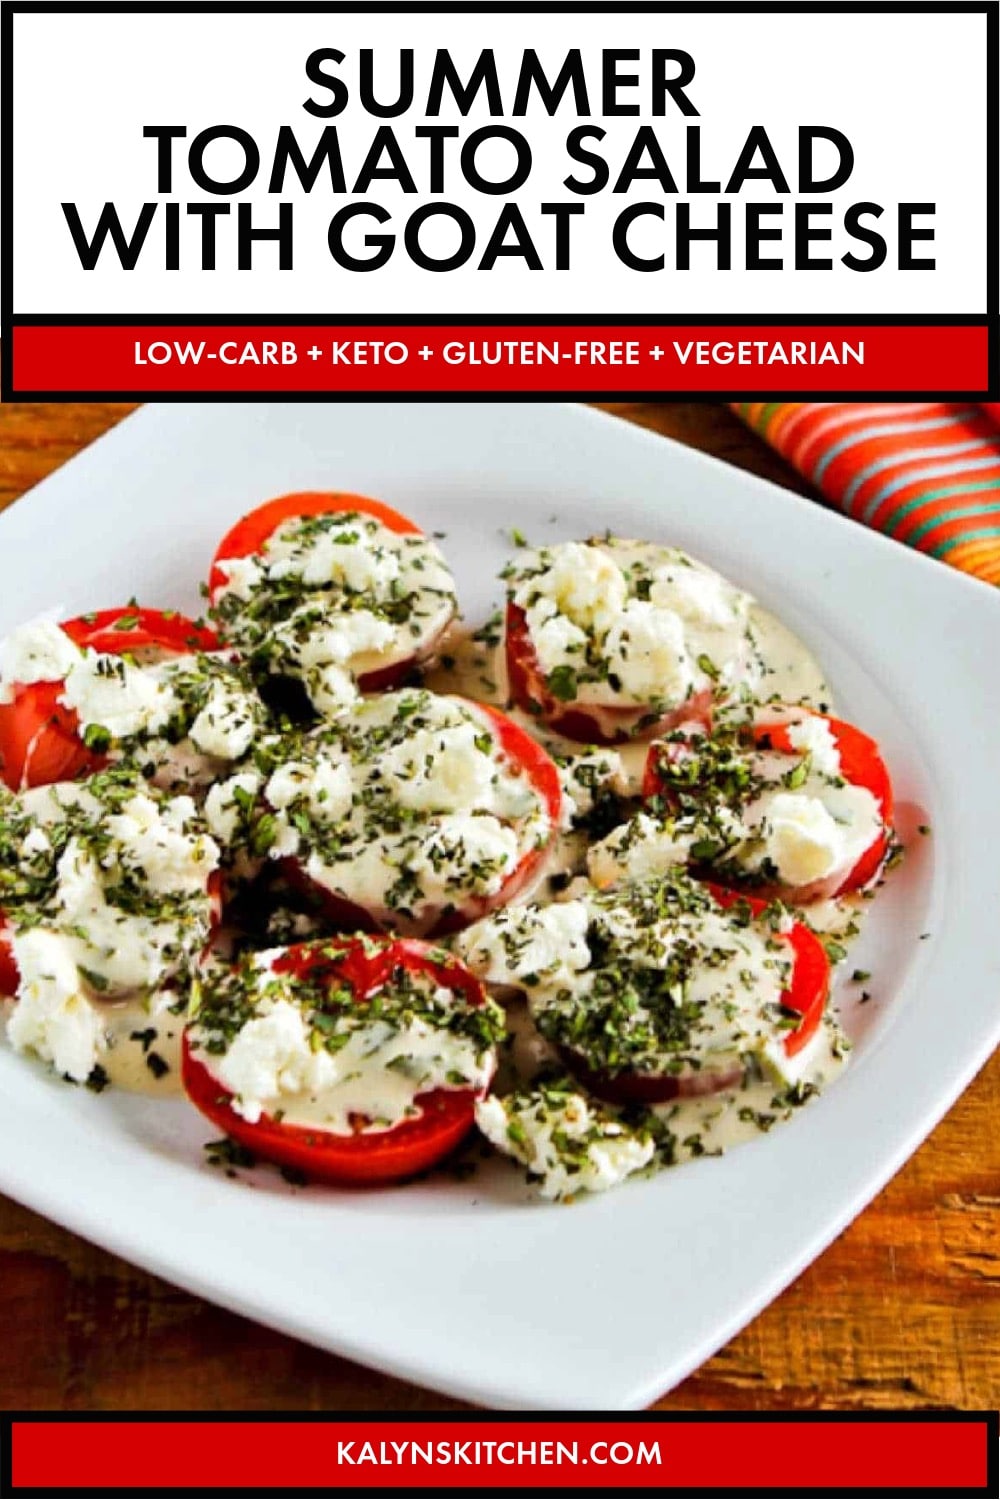 Pinterest image of Summer Tomato Salad with Goat Cheese